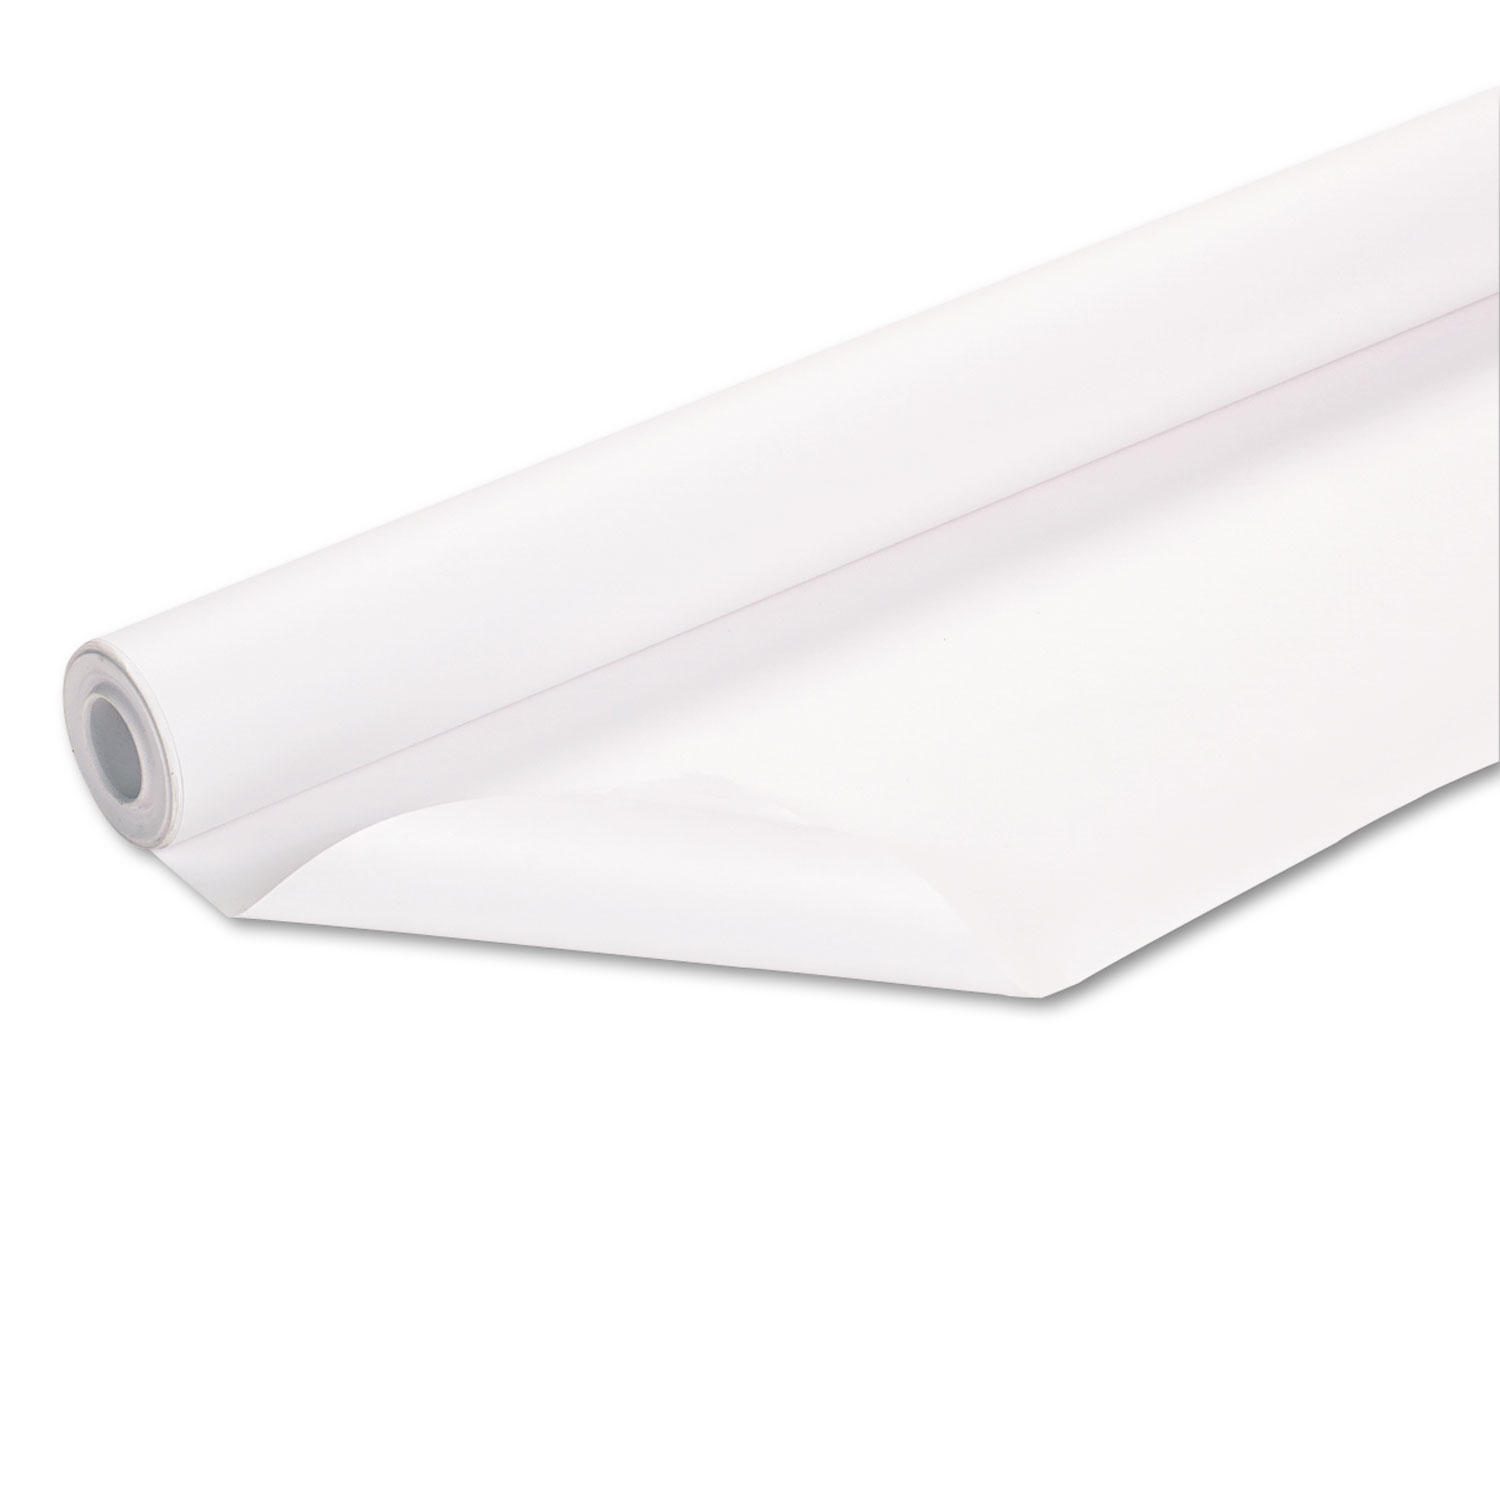  Pacon 57015 Fadeless Paper Roll, 50lb, 48 x 50ft, White (PAC57015) 